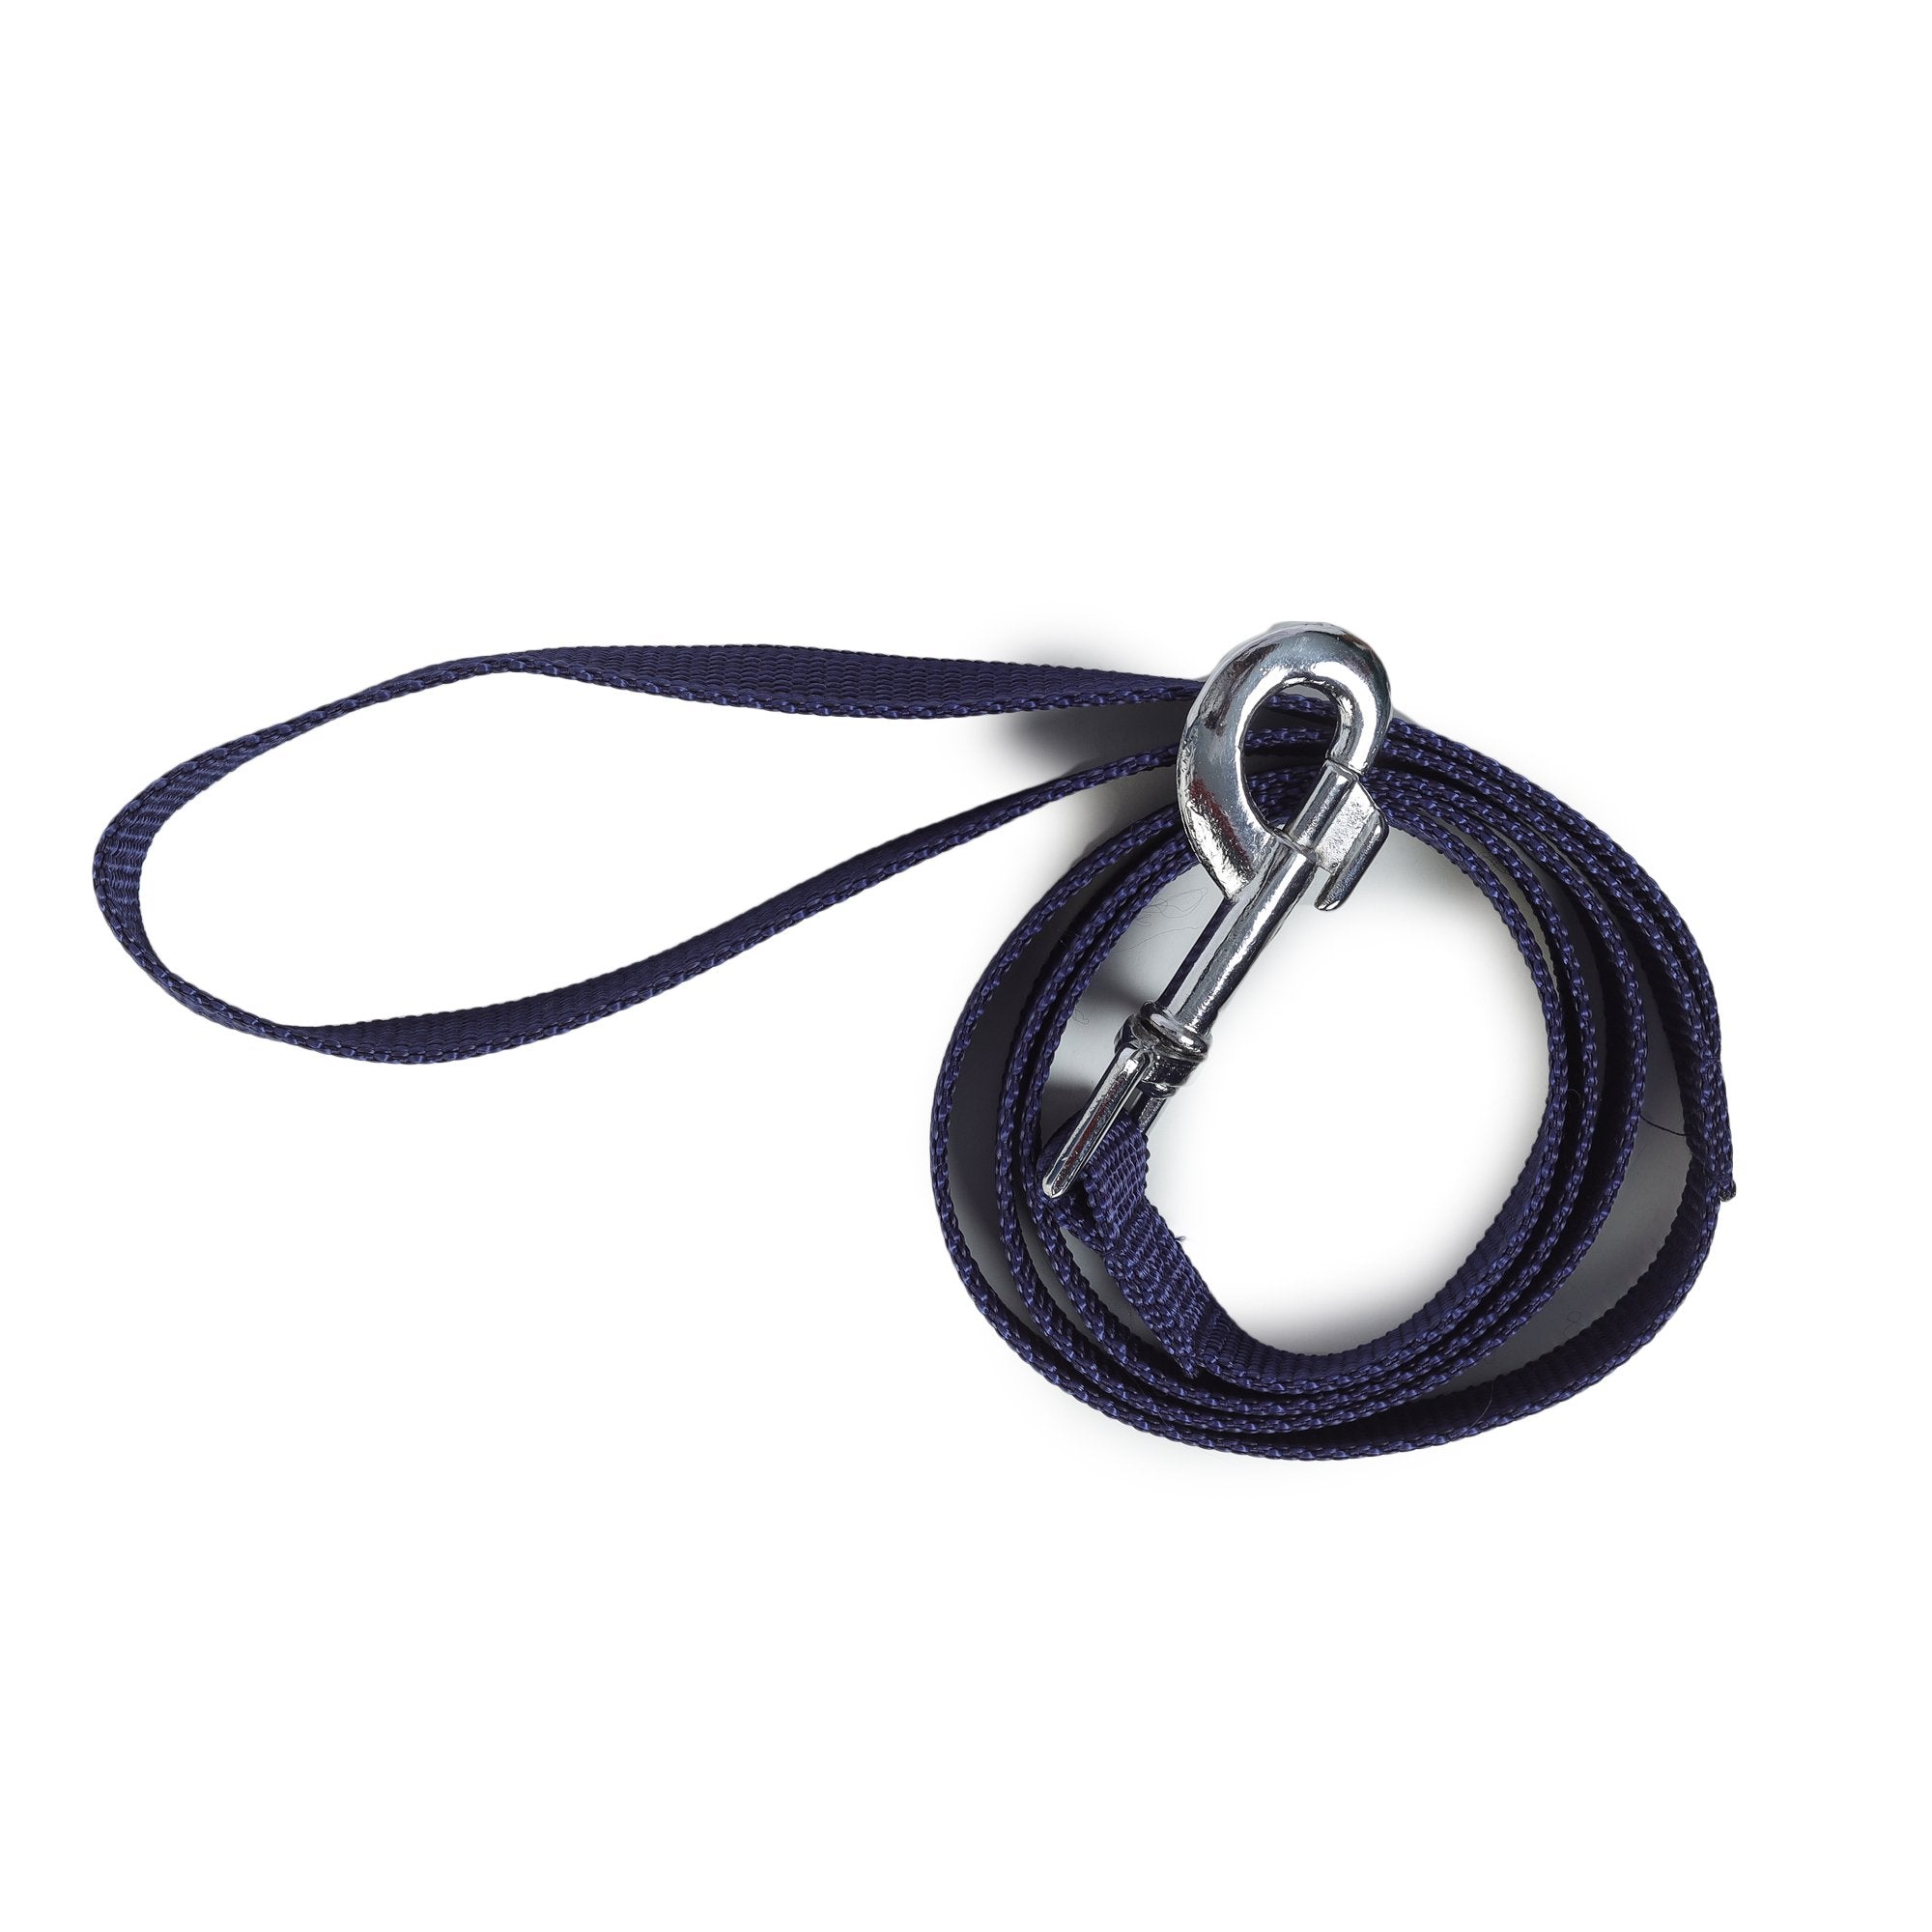 blue coloured dog leash by Barks & Wags